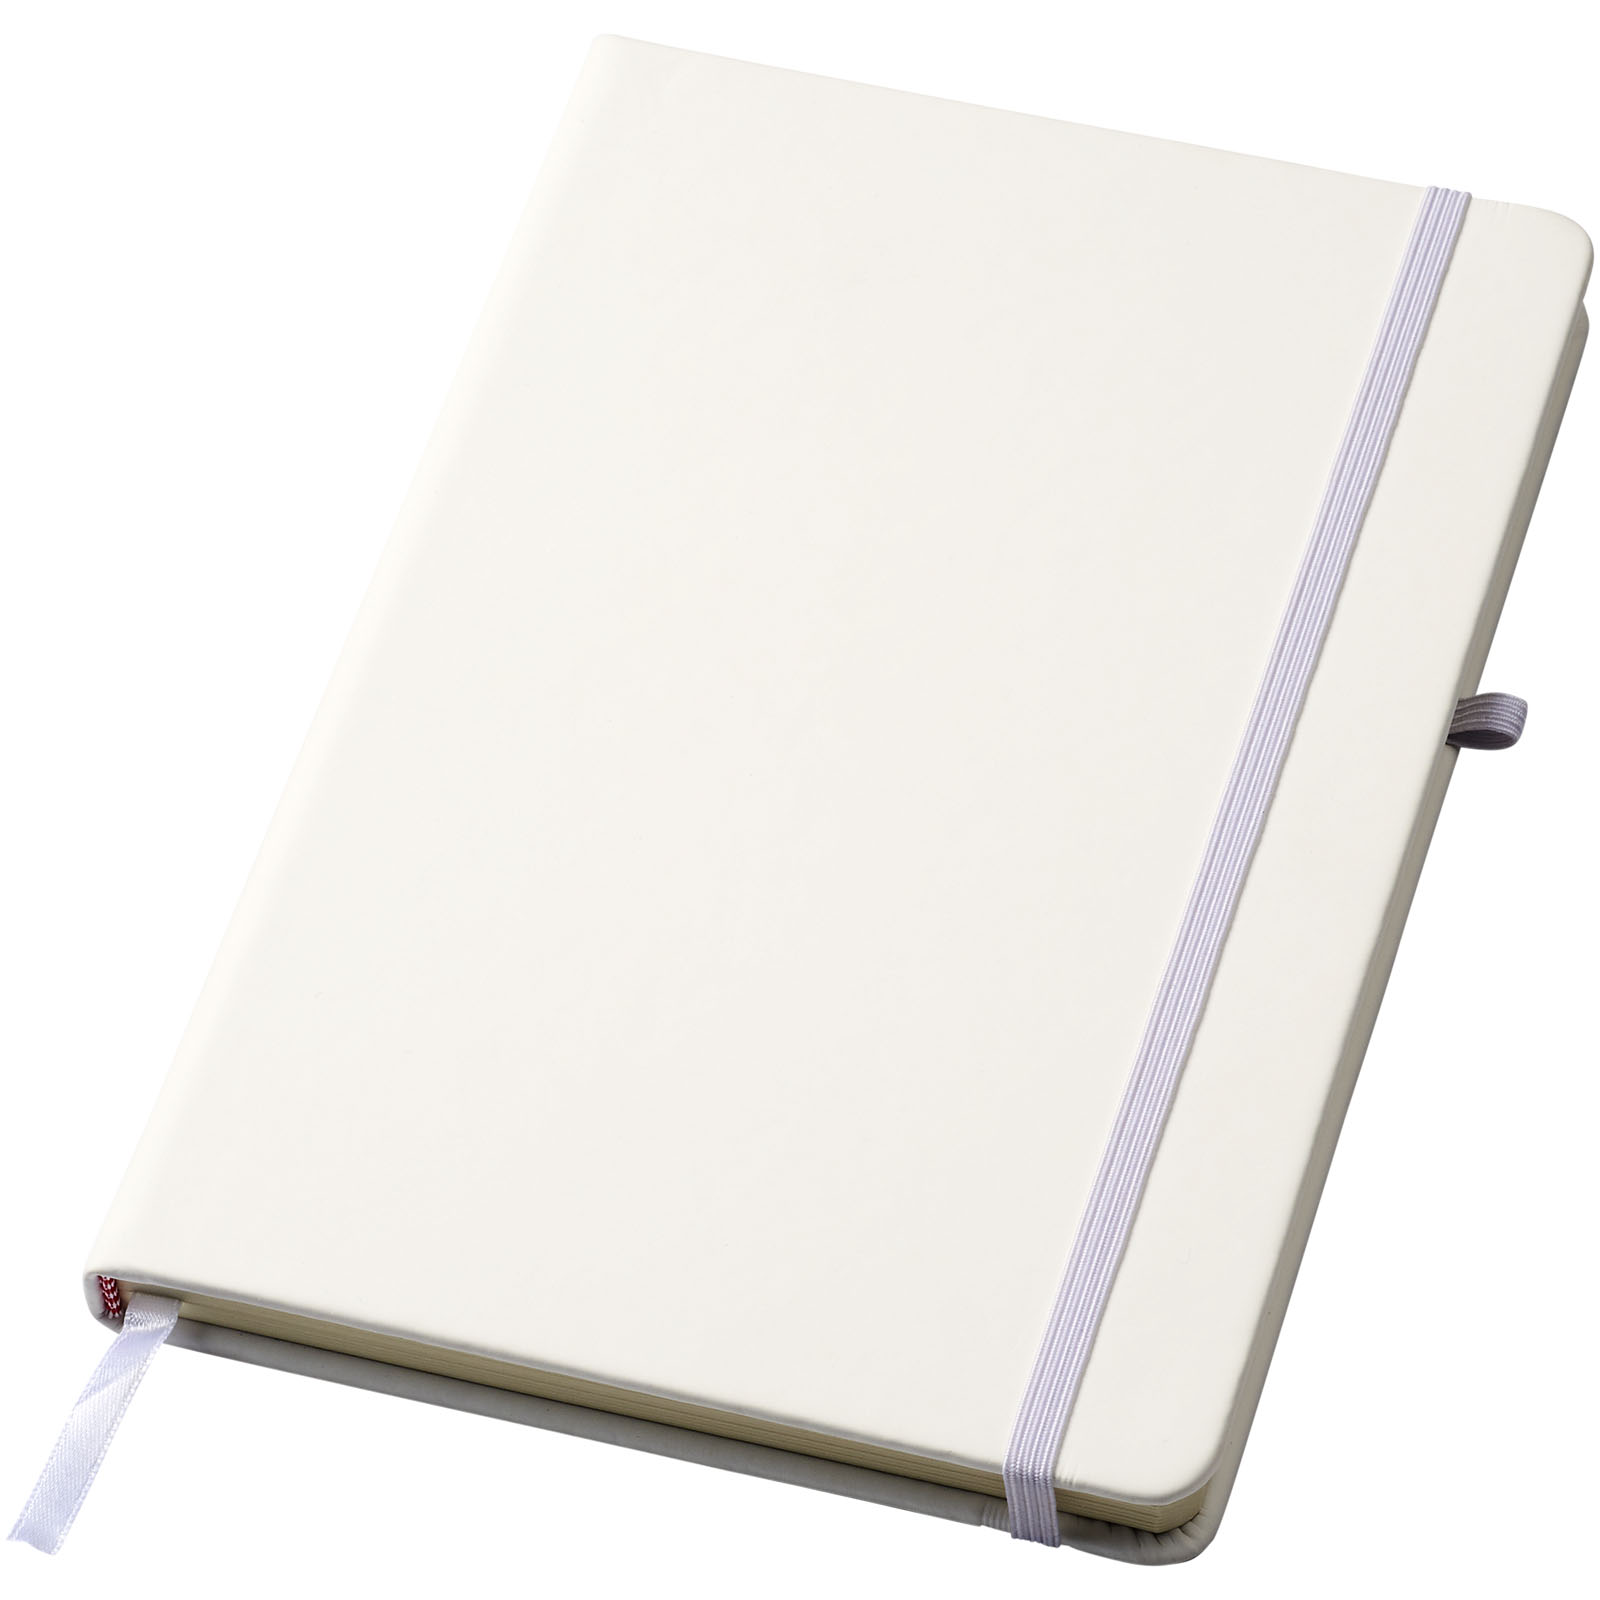 Notebooks & Desk Essentials - Polar A5 notebook with lined pages